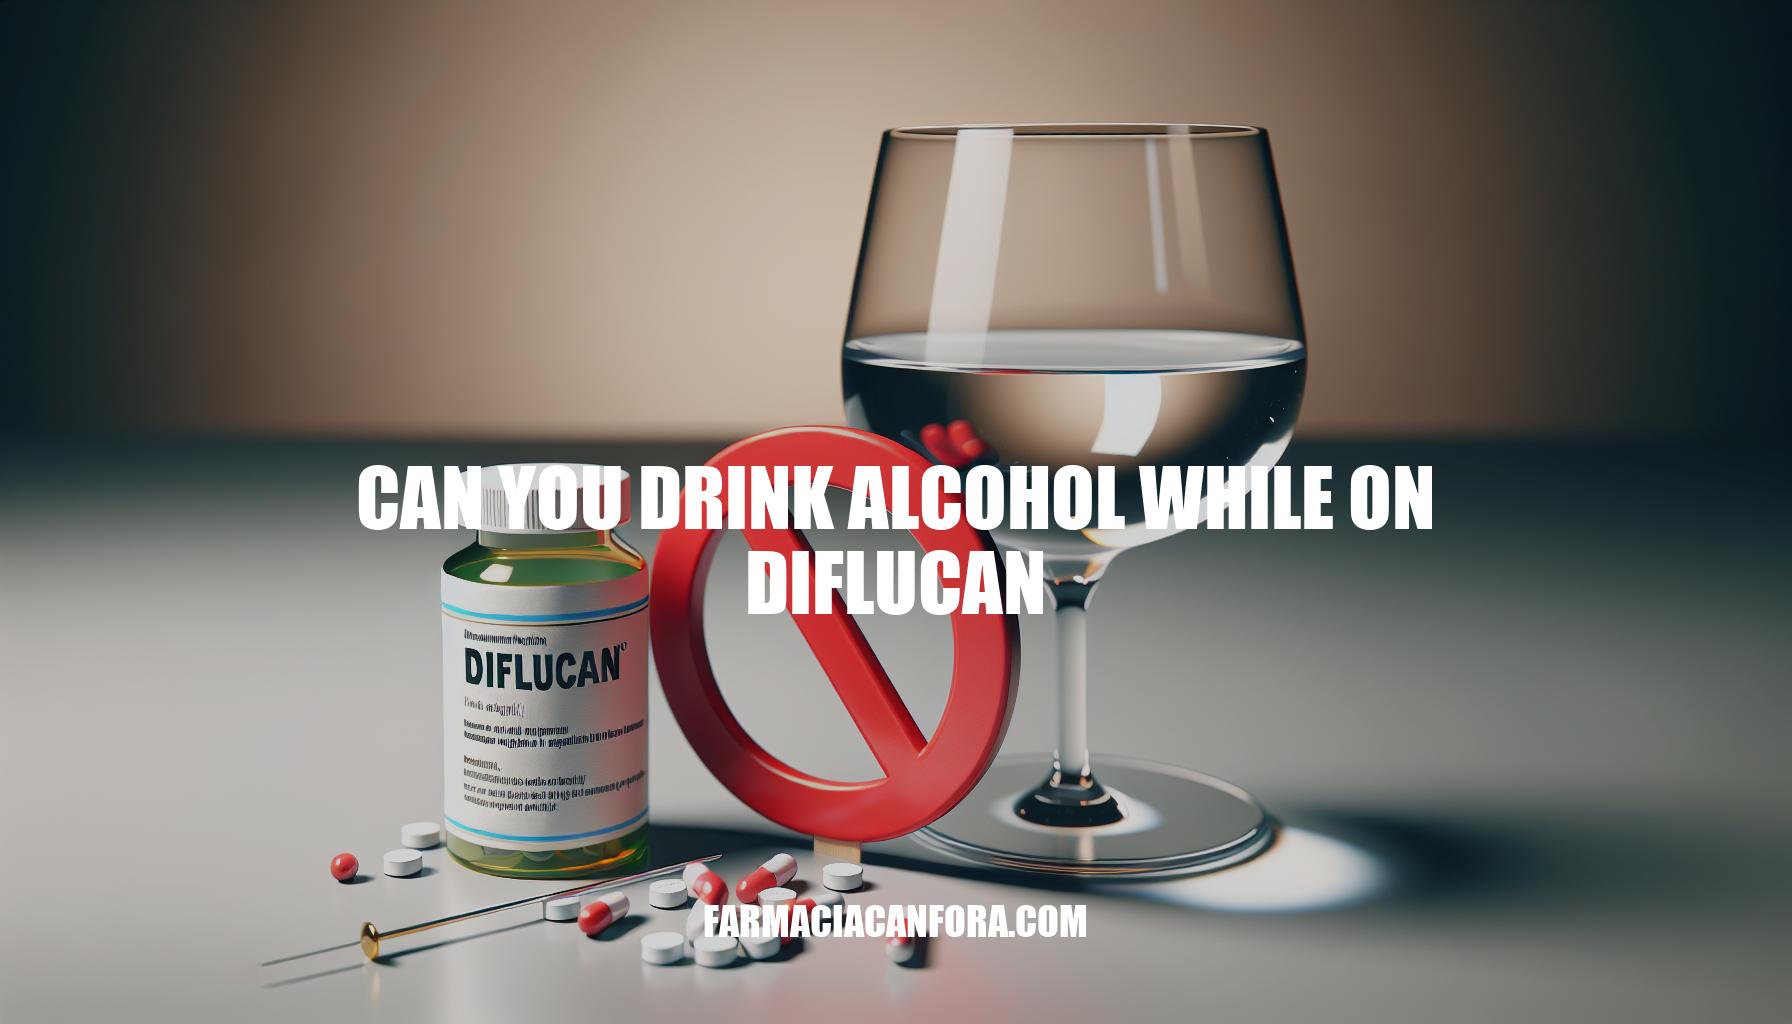 Can You Drink Alcohol While on Diflucan